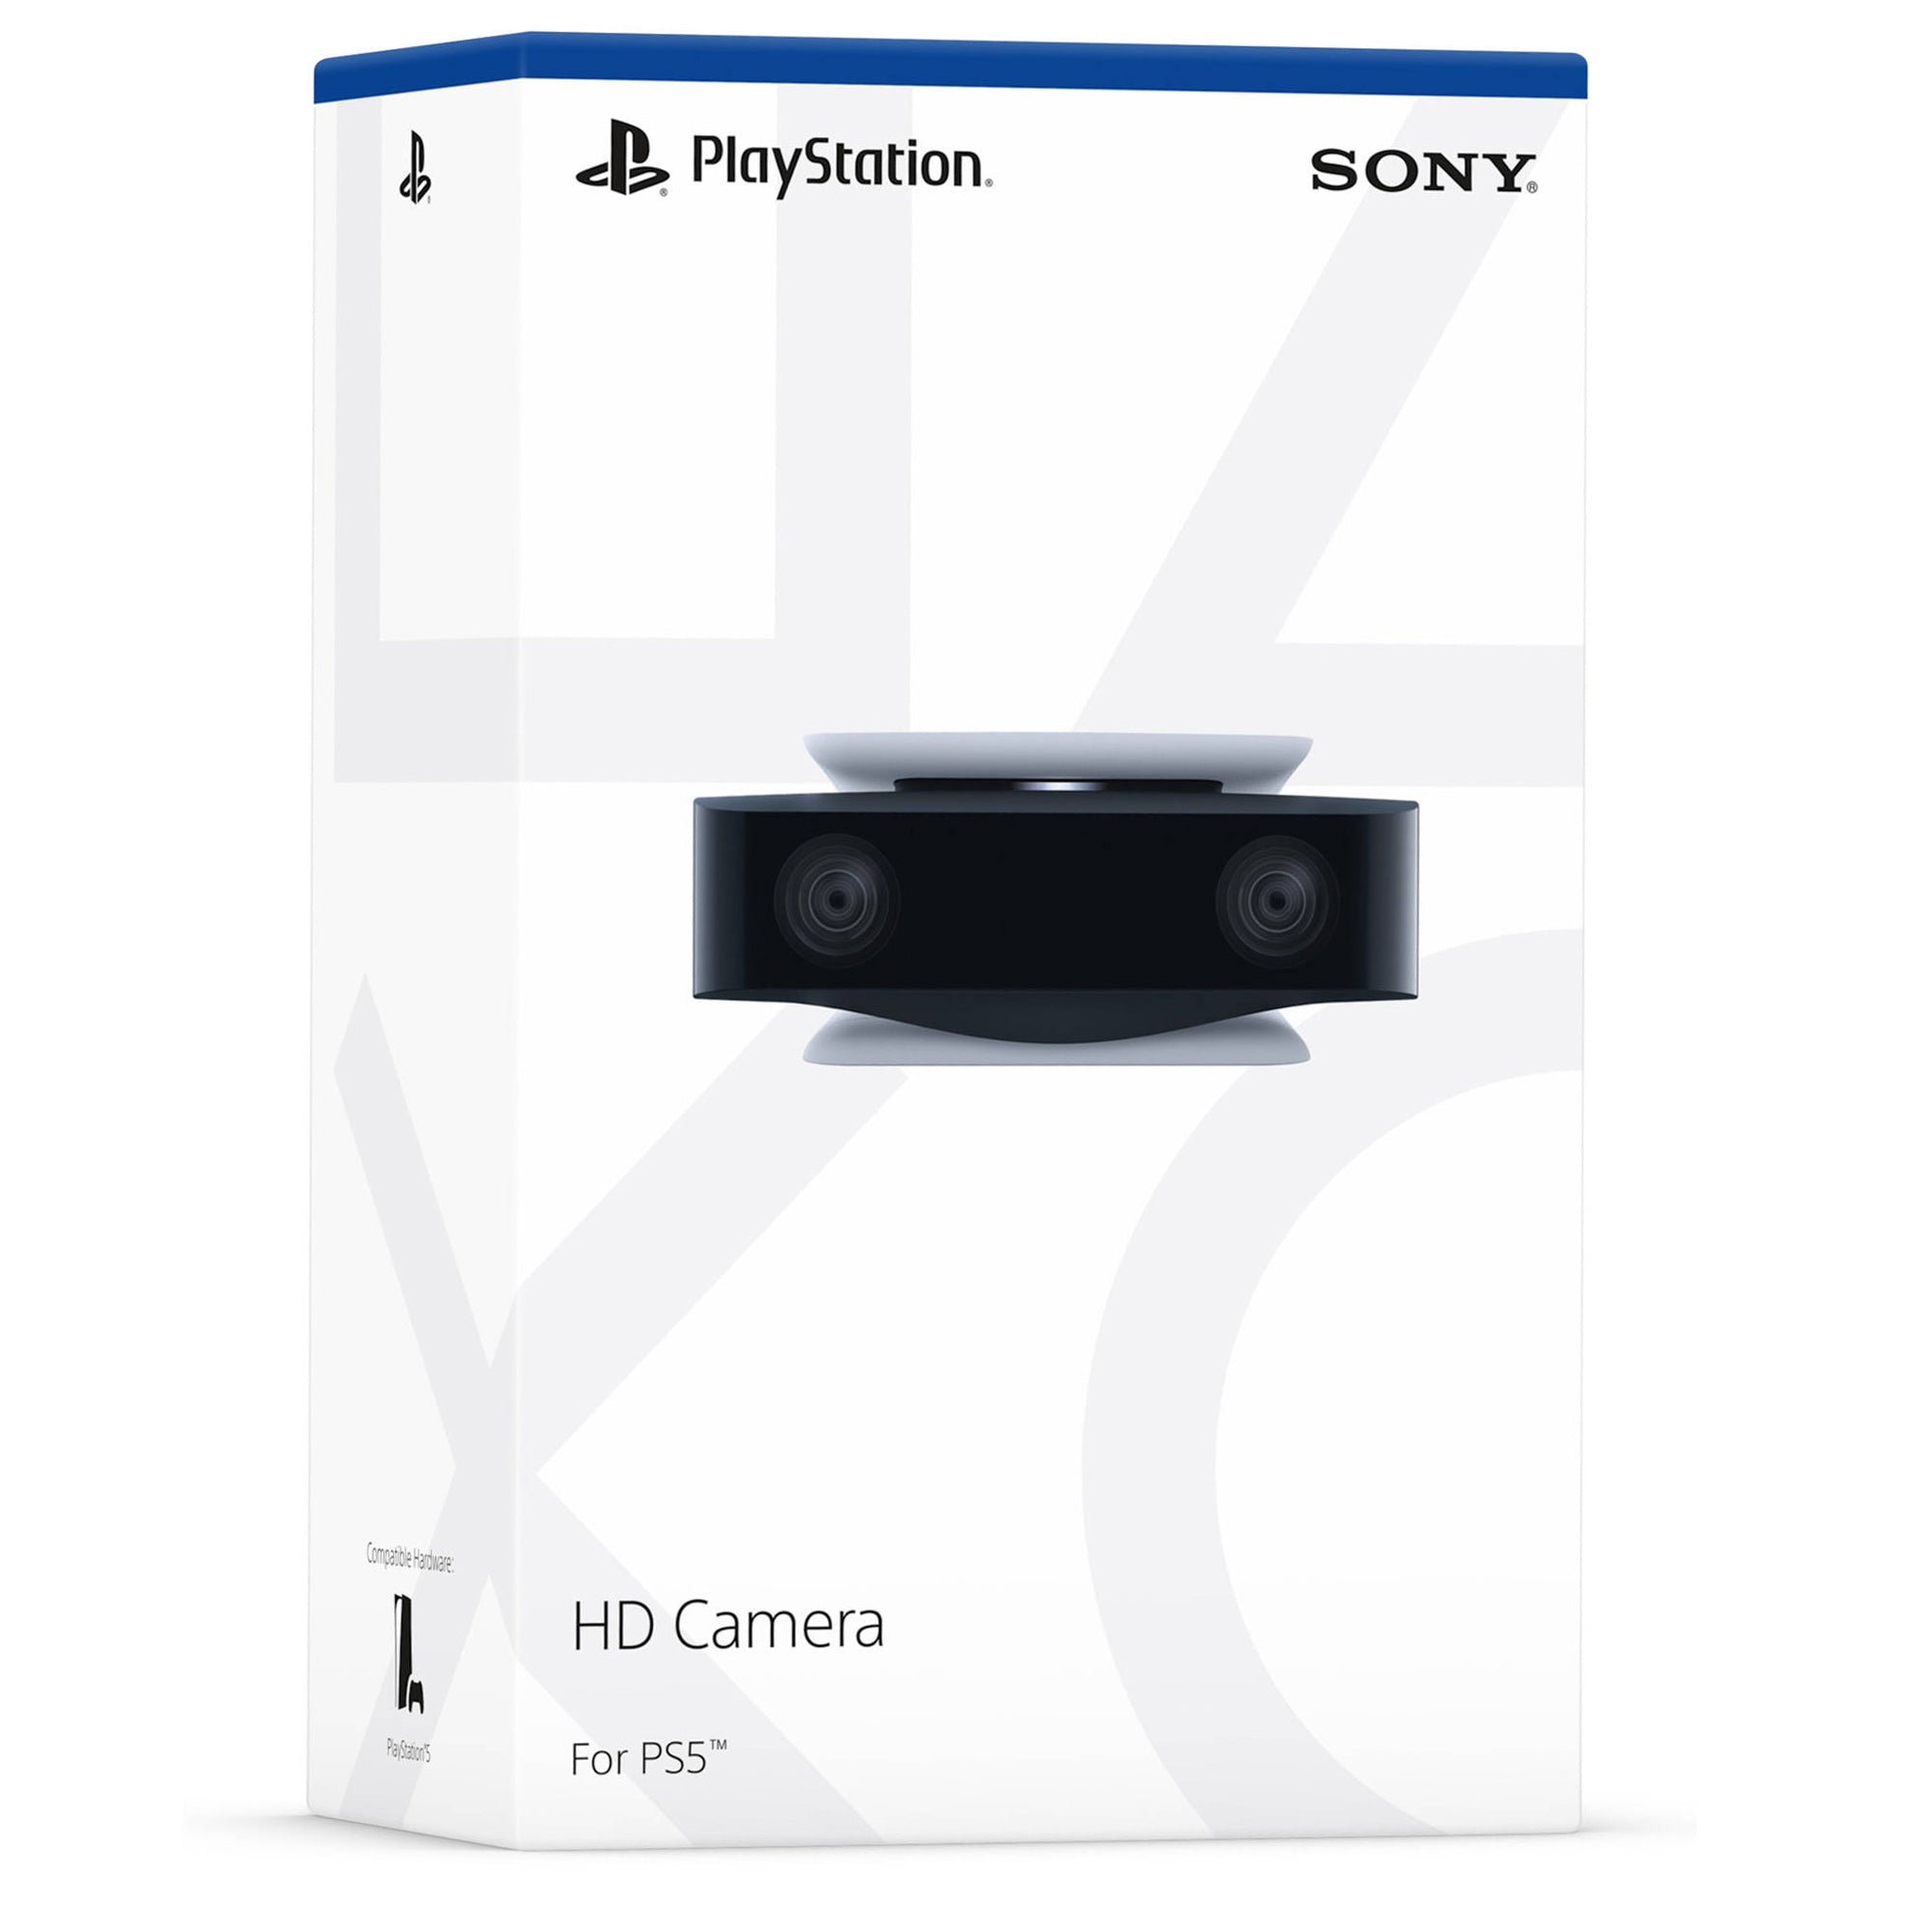 Sony Playstation 5 1080p HD Camera for Live Streaming w/ Dual Wide Angle Lenses - Pro-Distributing